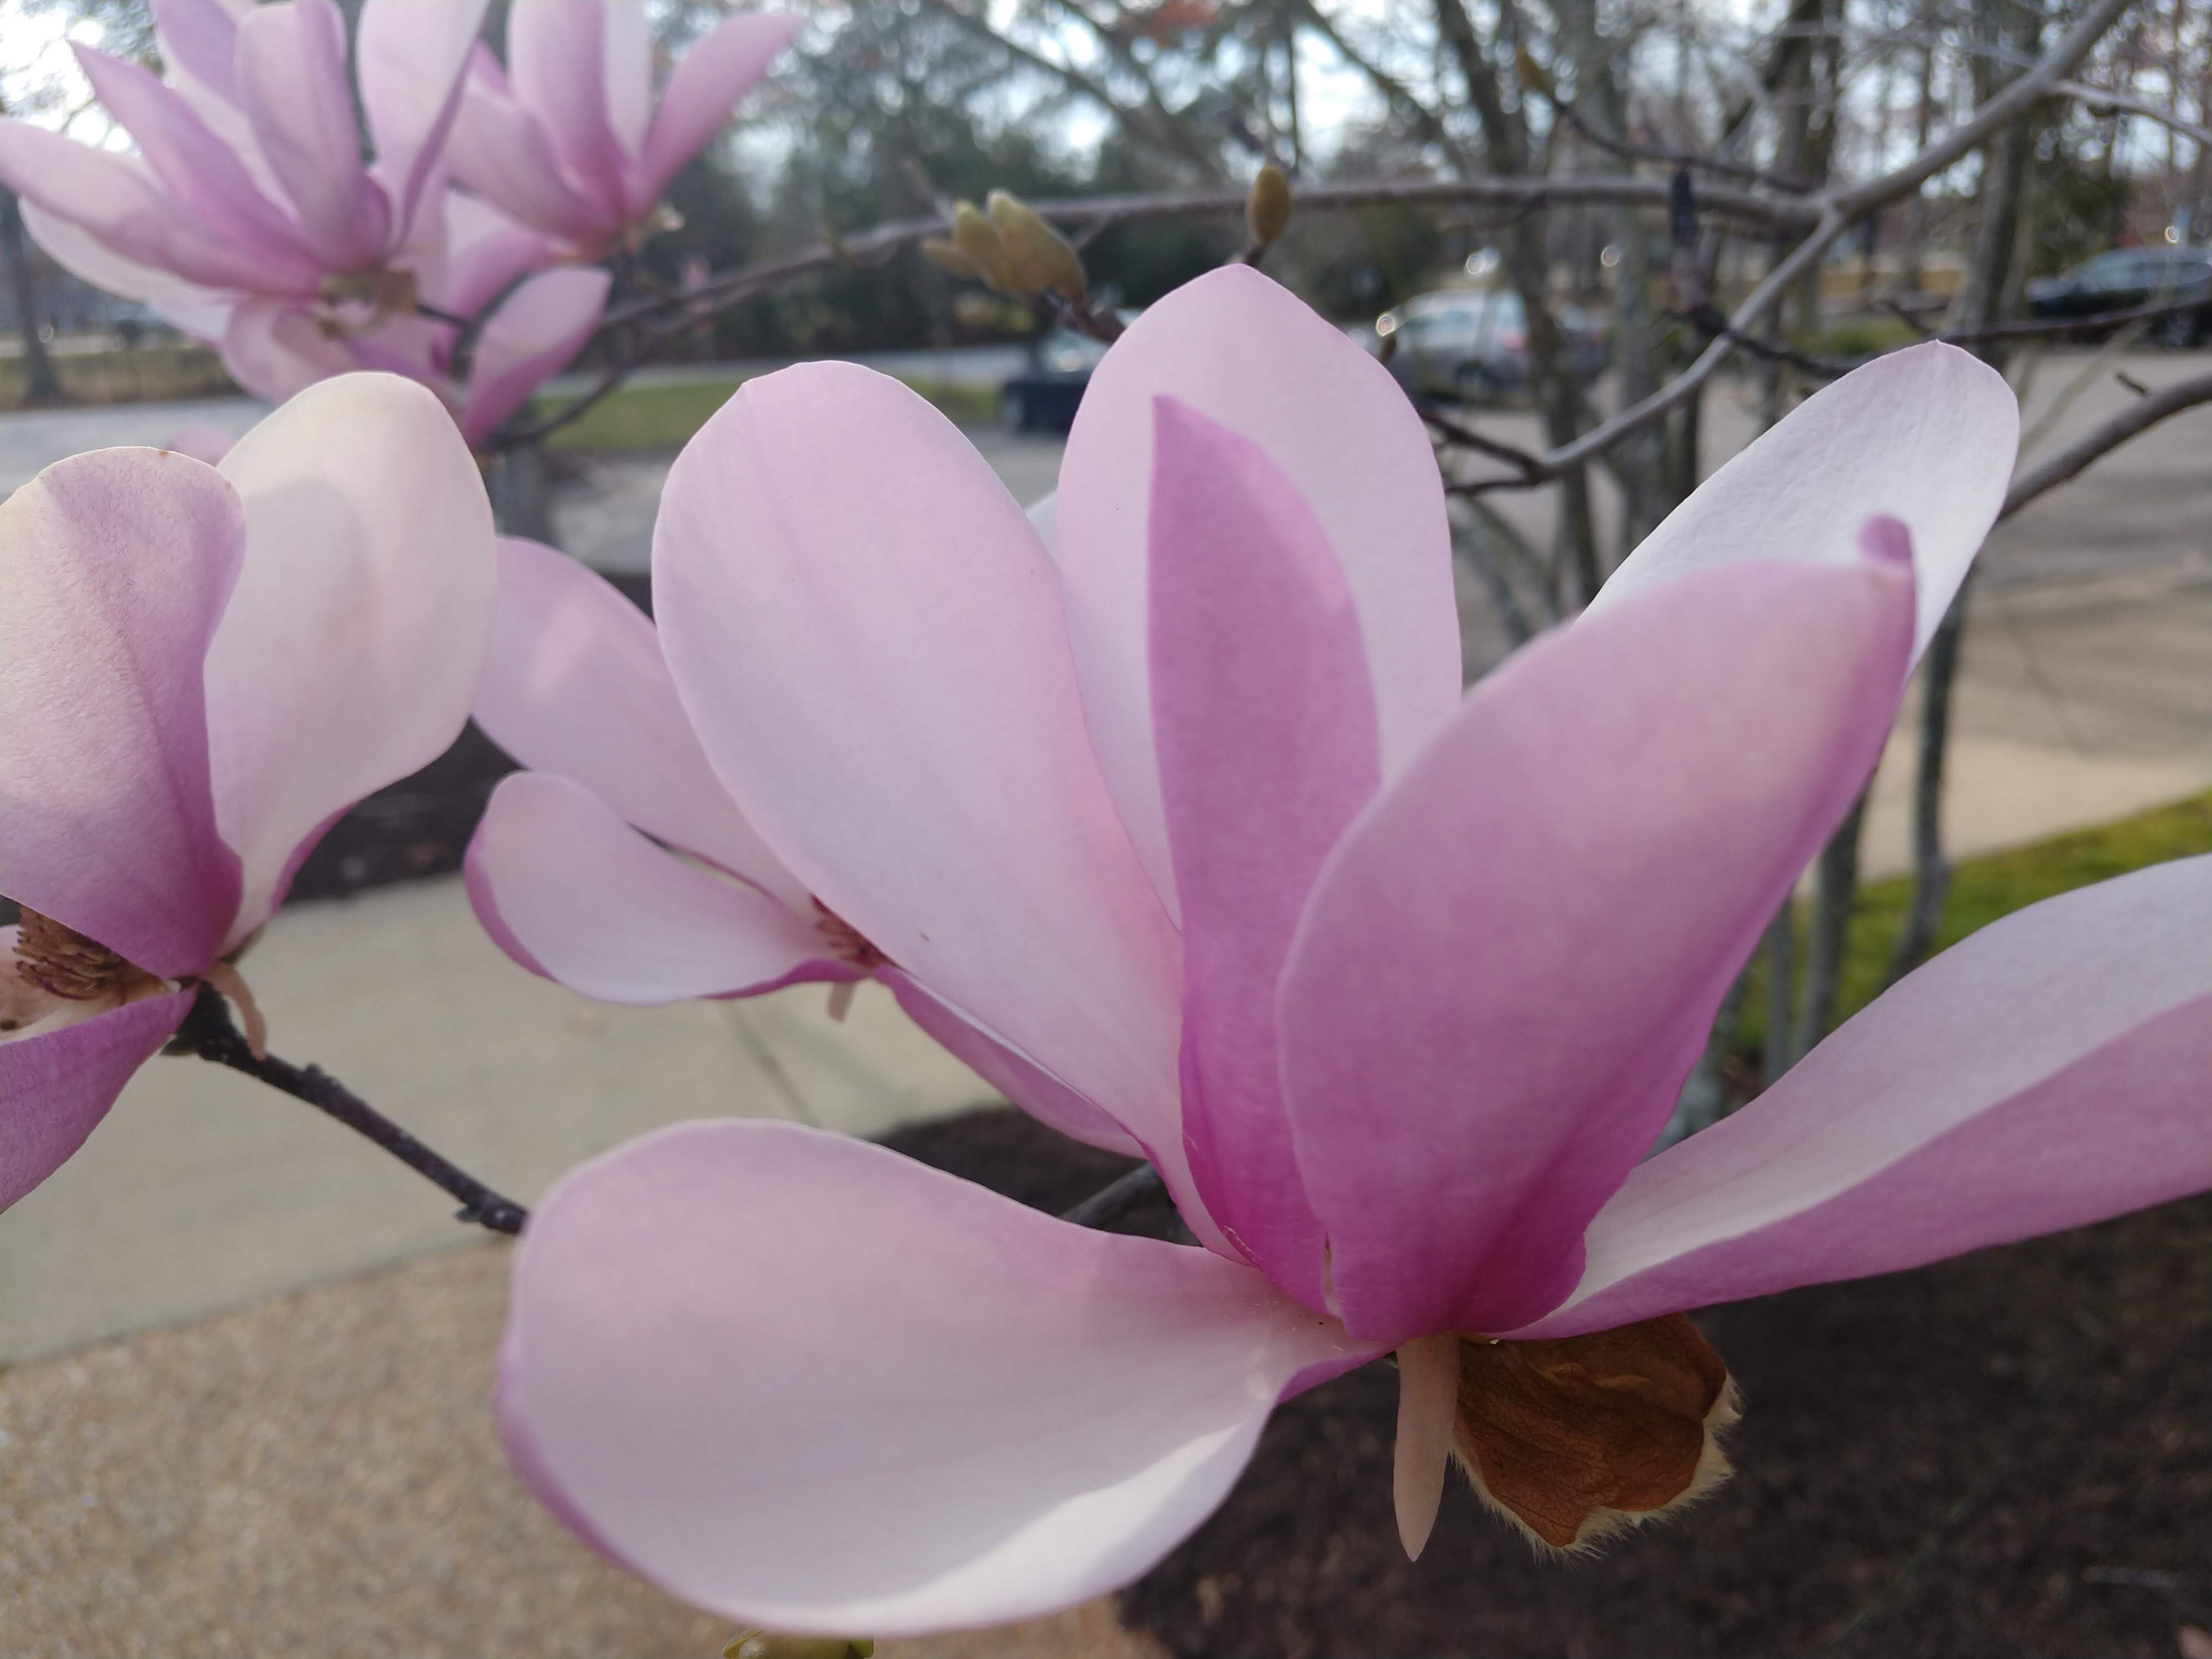 Close-up of blossoms, Applied Research Center, March 2020.